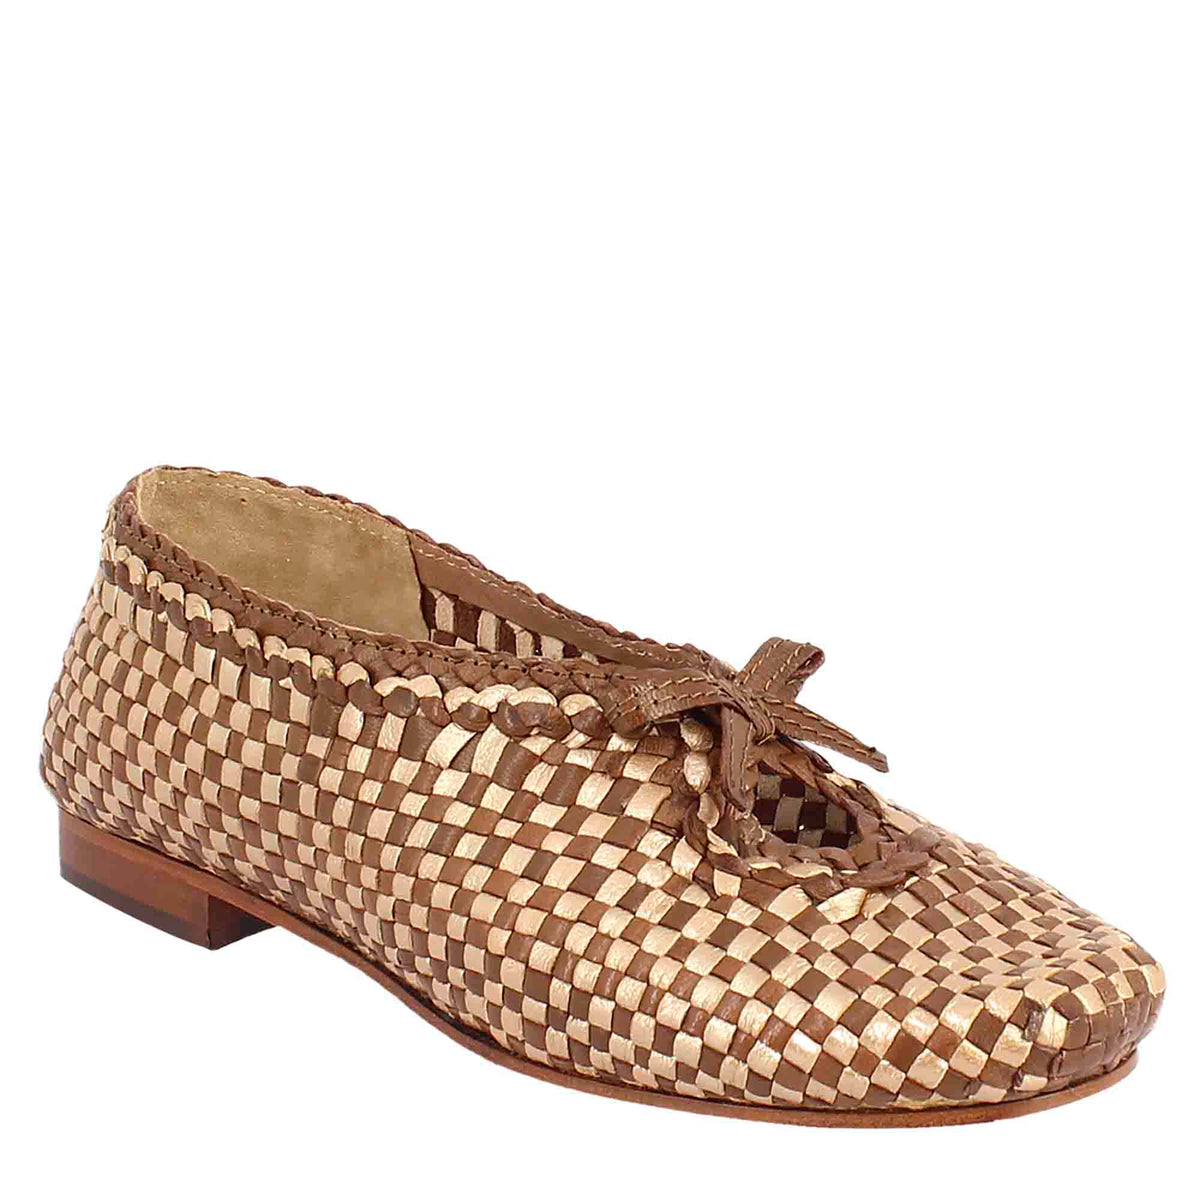 Women's handmade slip-on loafers in brown and gold braided leather